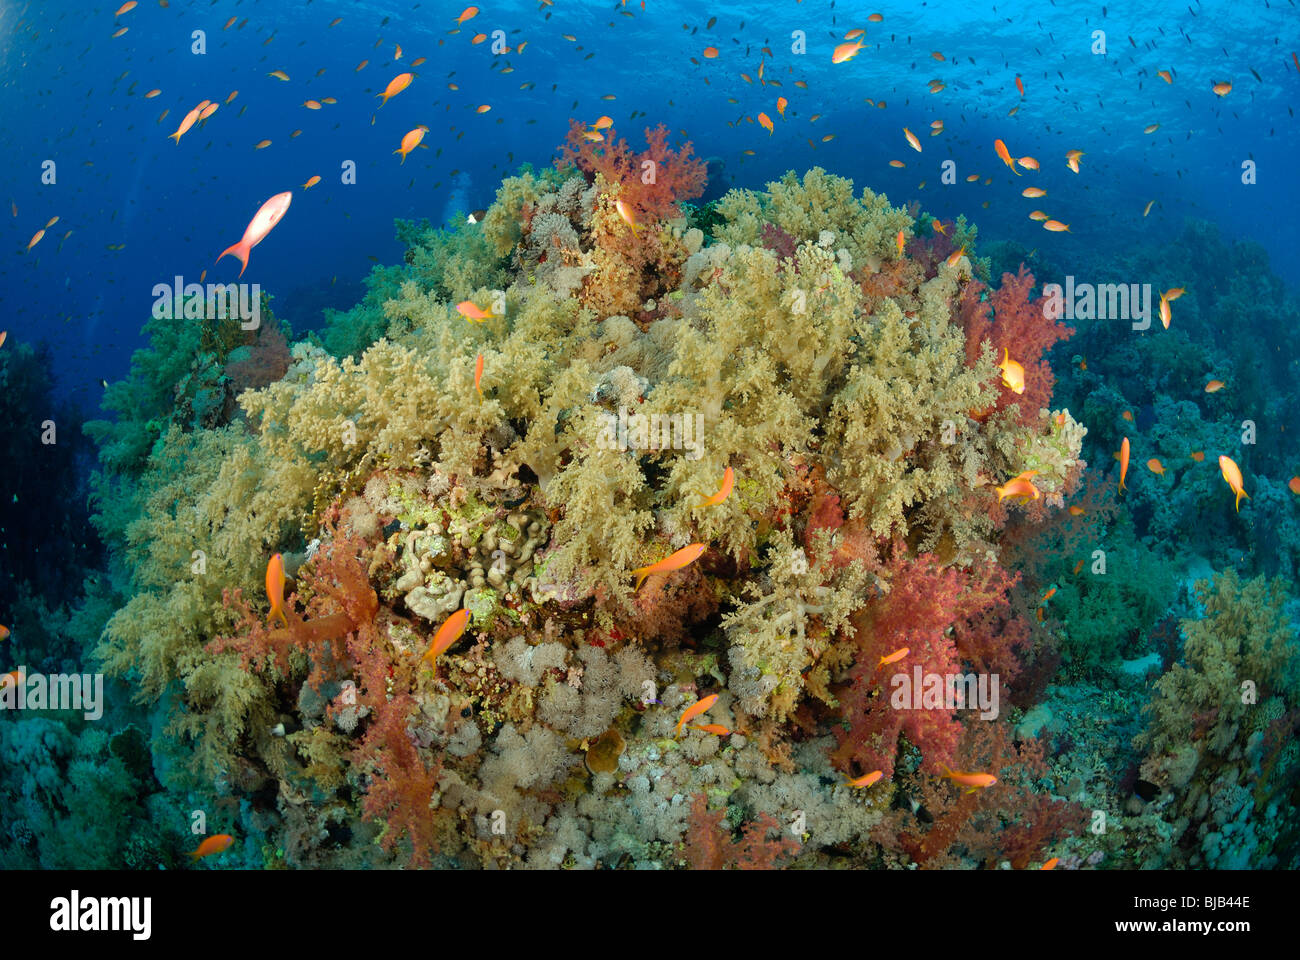 Head of coral reef in the Red Sea, off Hurghada, Egypt. Stock Photo